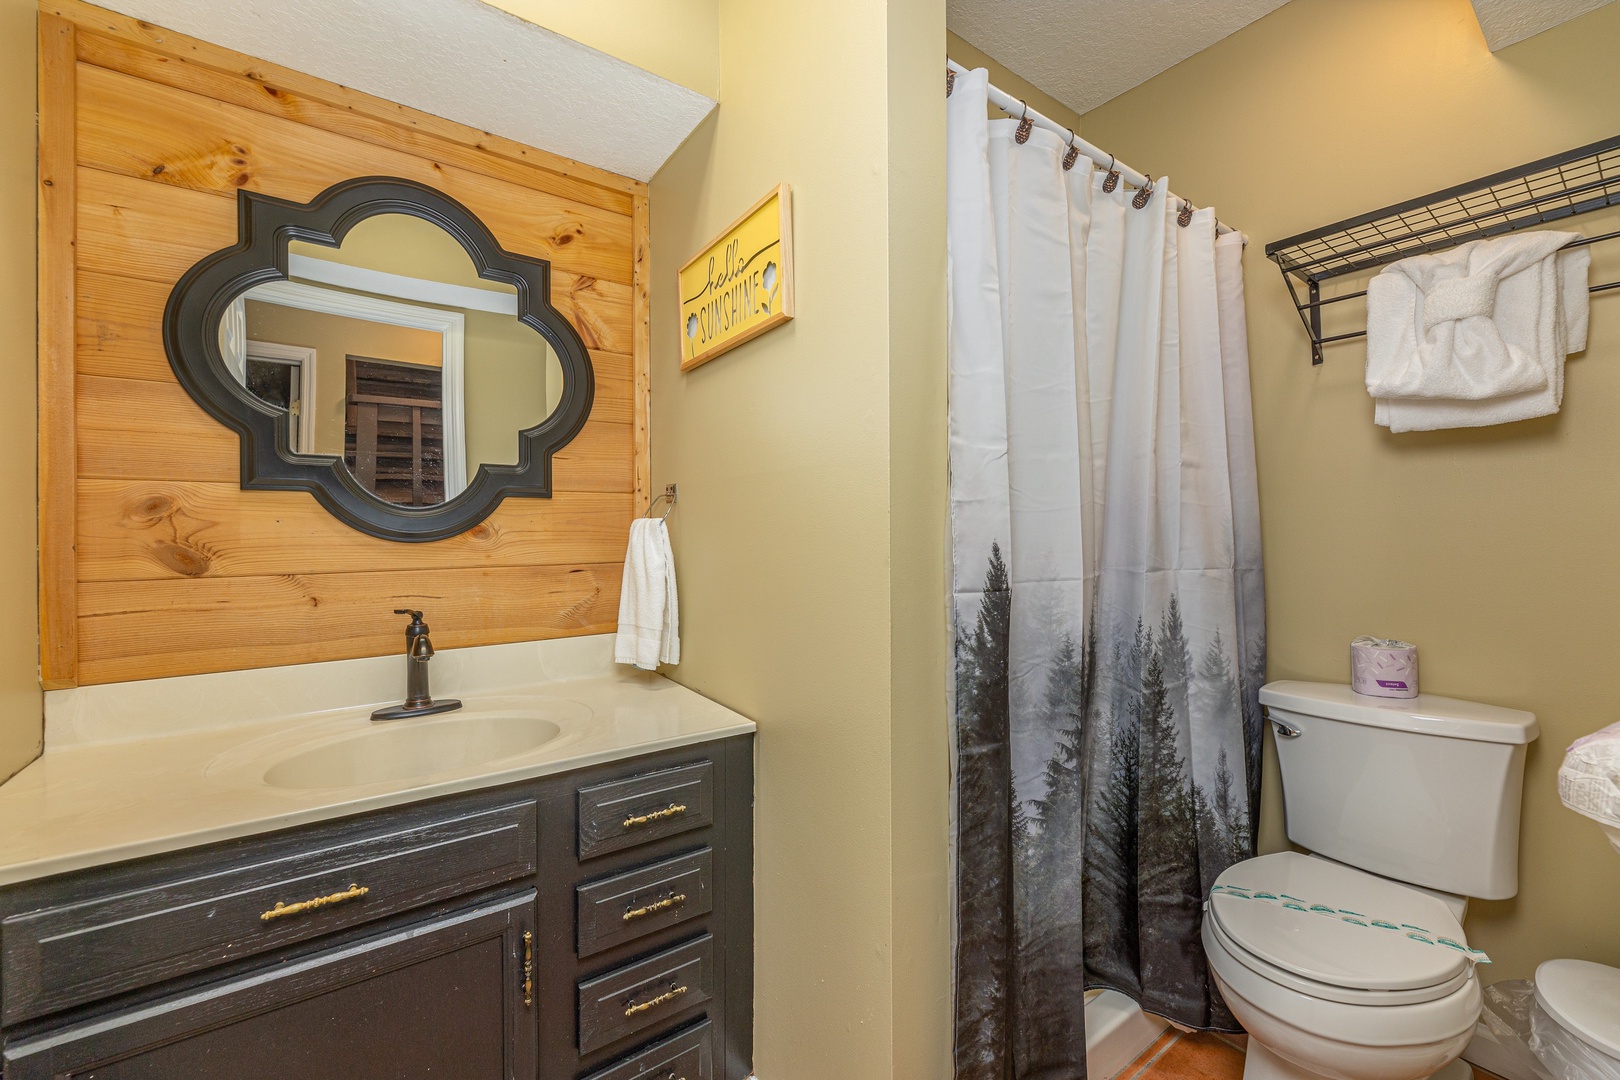 Bathroom with shower at Copper Owl, a 2 bedroom cabin rental located in Pigeon Forge